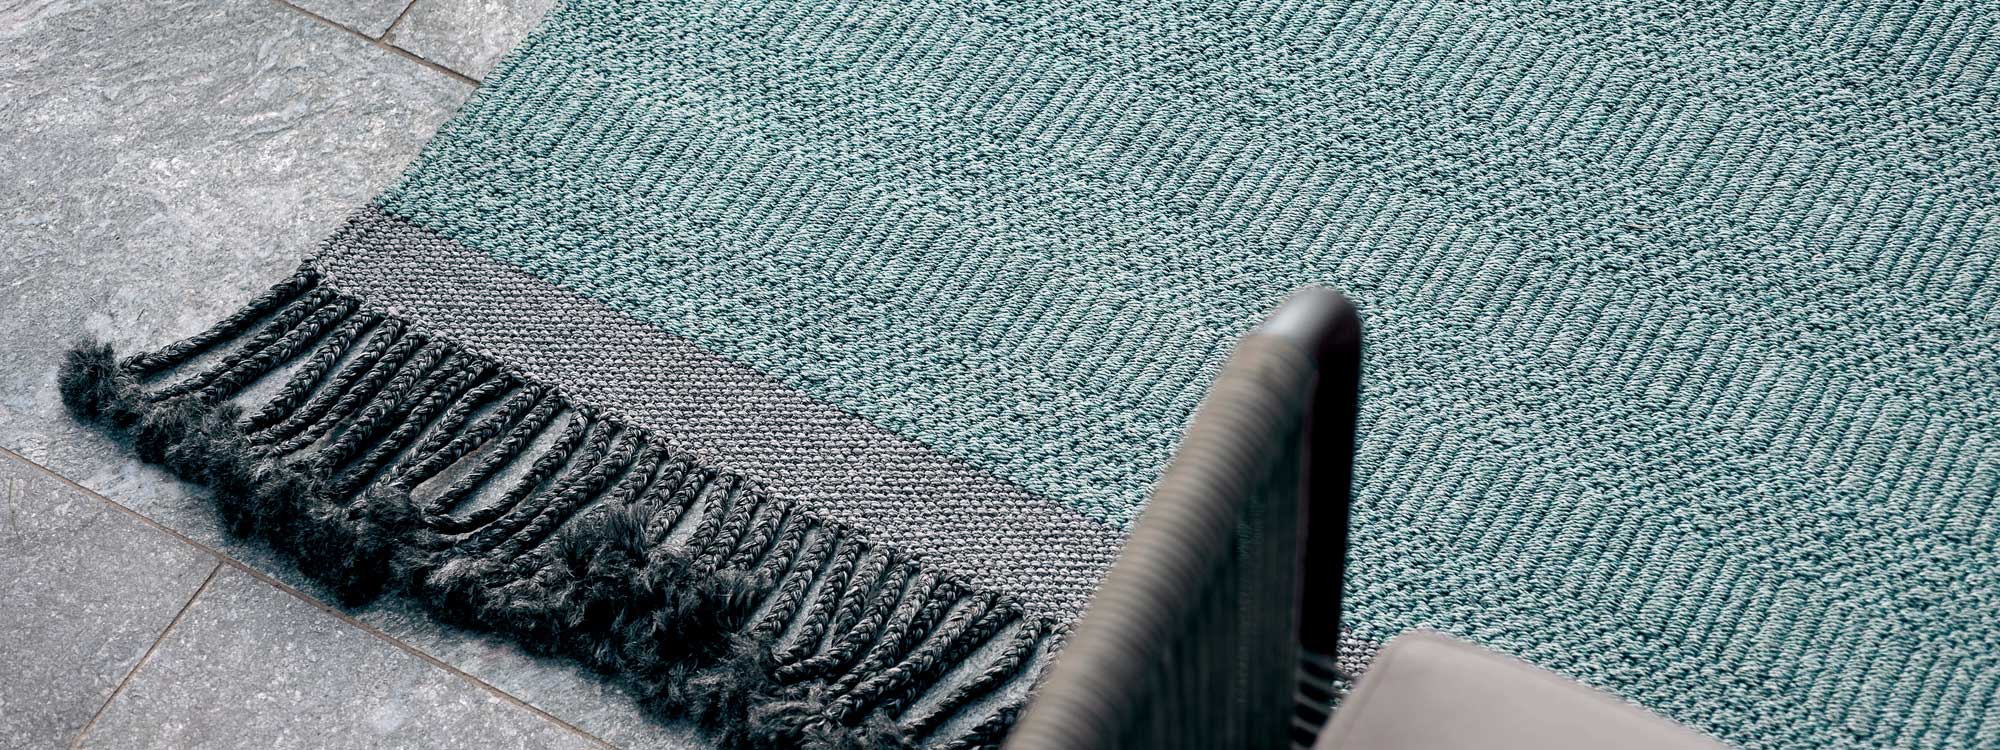 Image of detail of Atlas hand-woven outdoor rug with arm of Harp chair in foreground